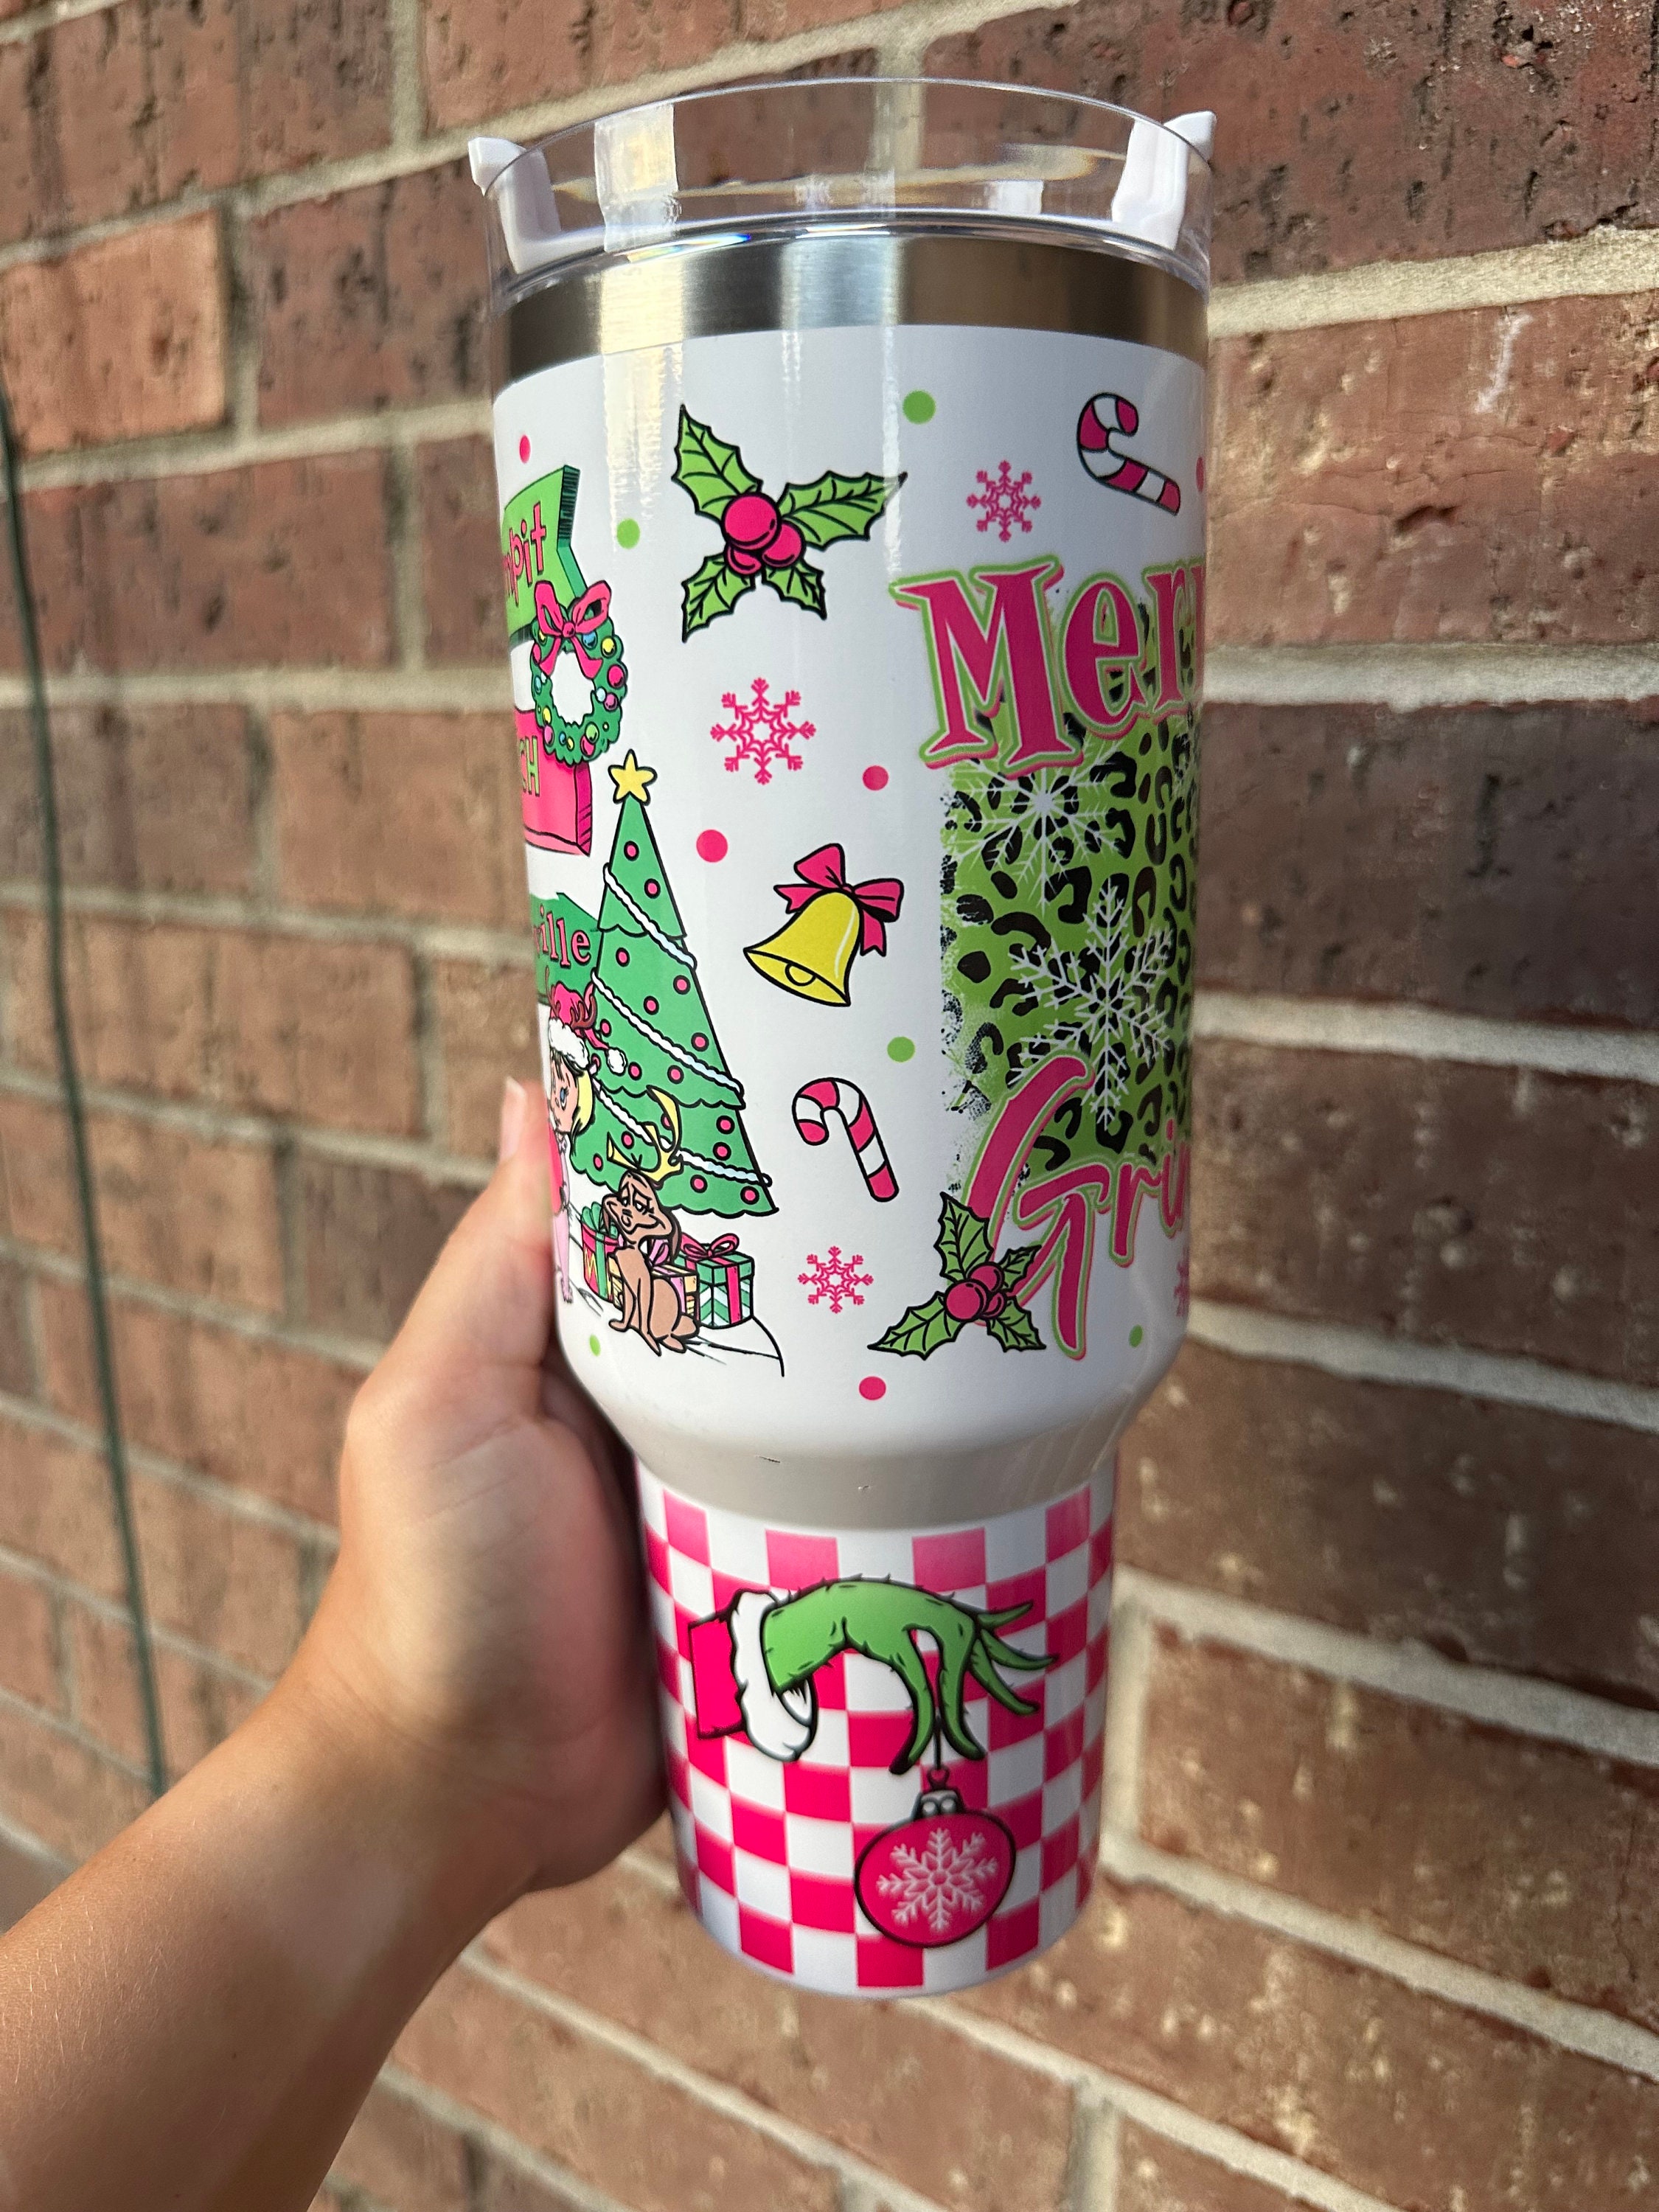 The Grinch Tumbler, Christmas Tumbler. Whoville tumbler, How the